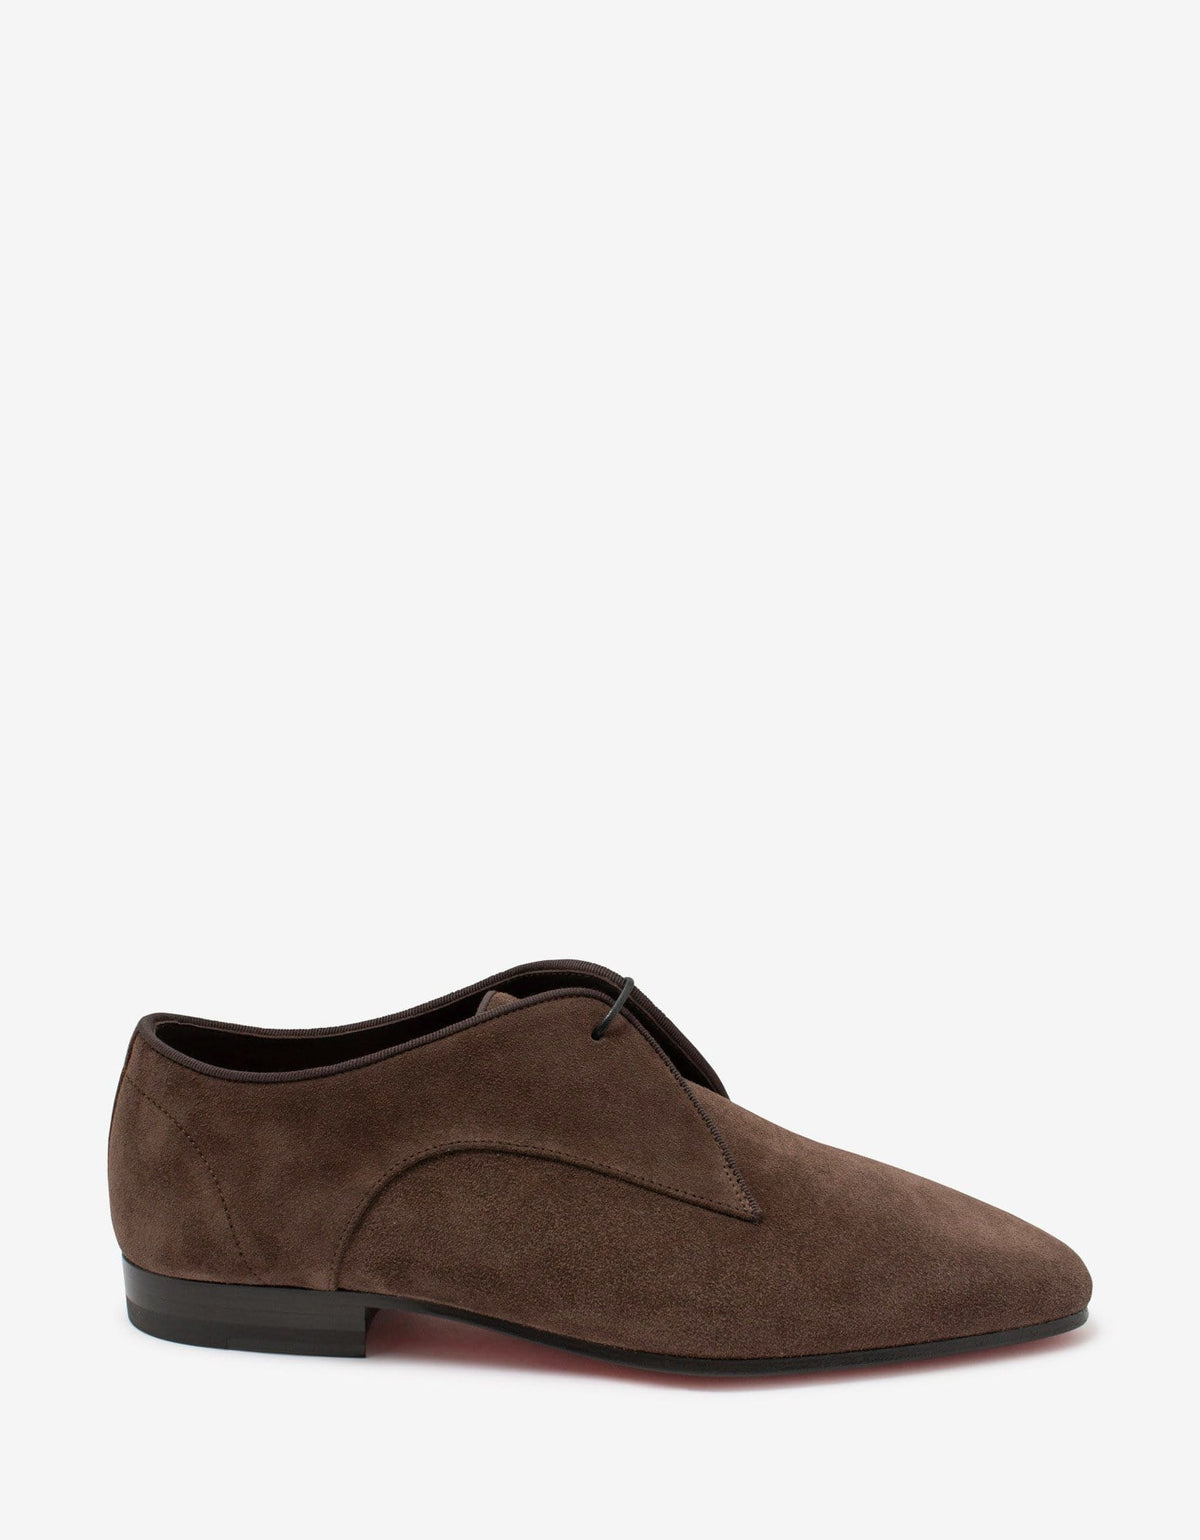 Christian Louboutin Carderby Brown Suede Leather Shoes